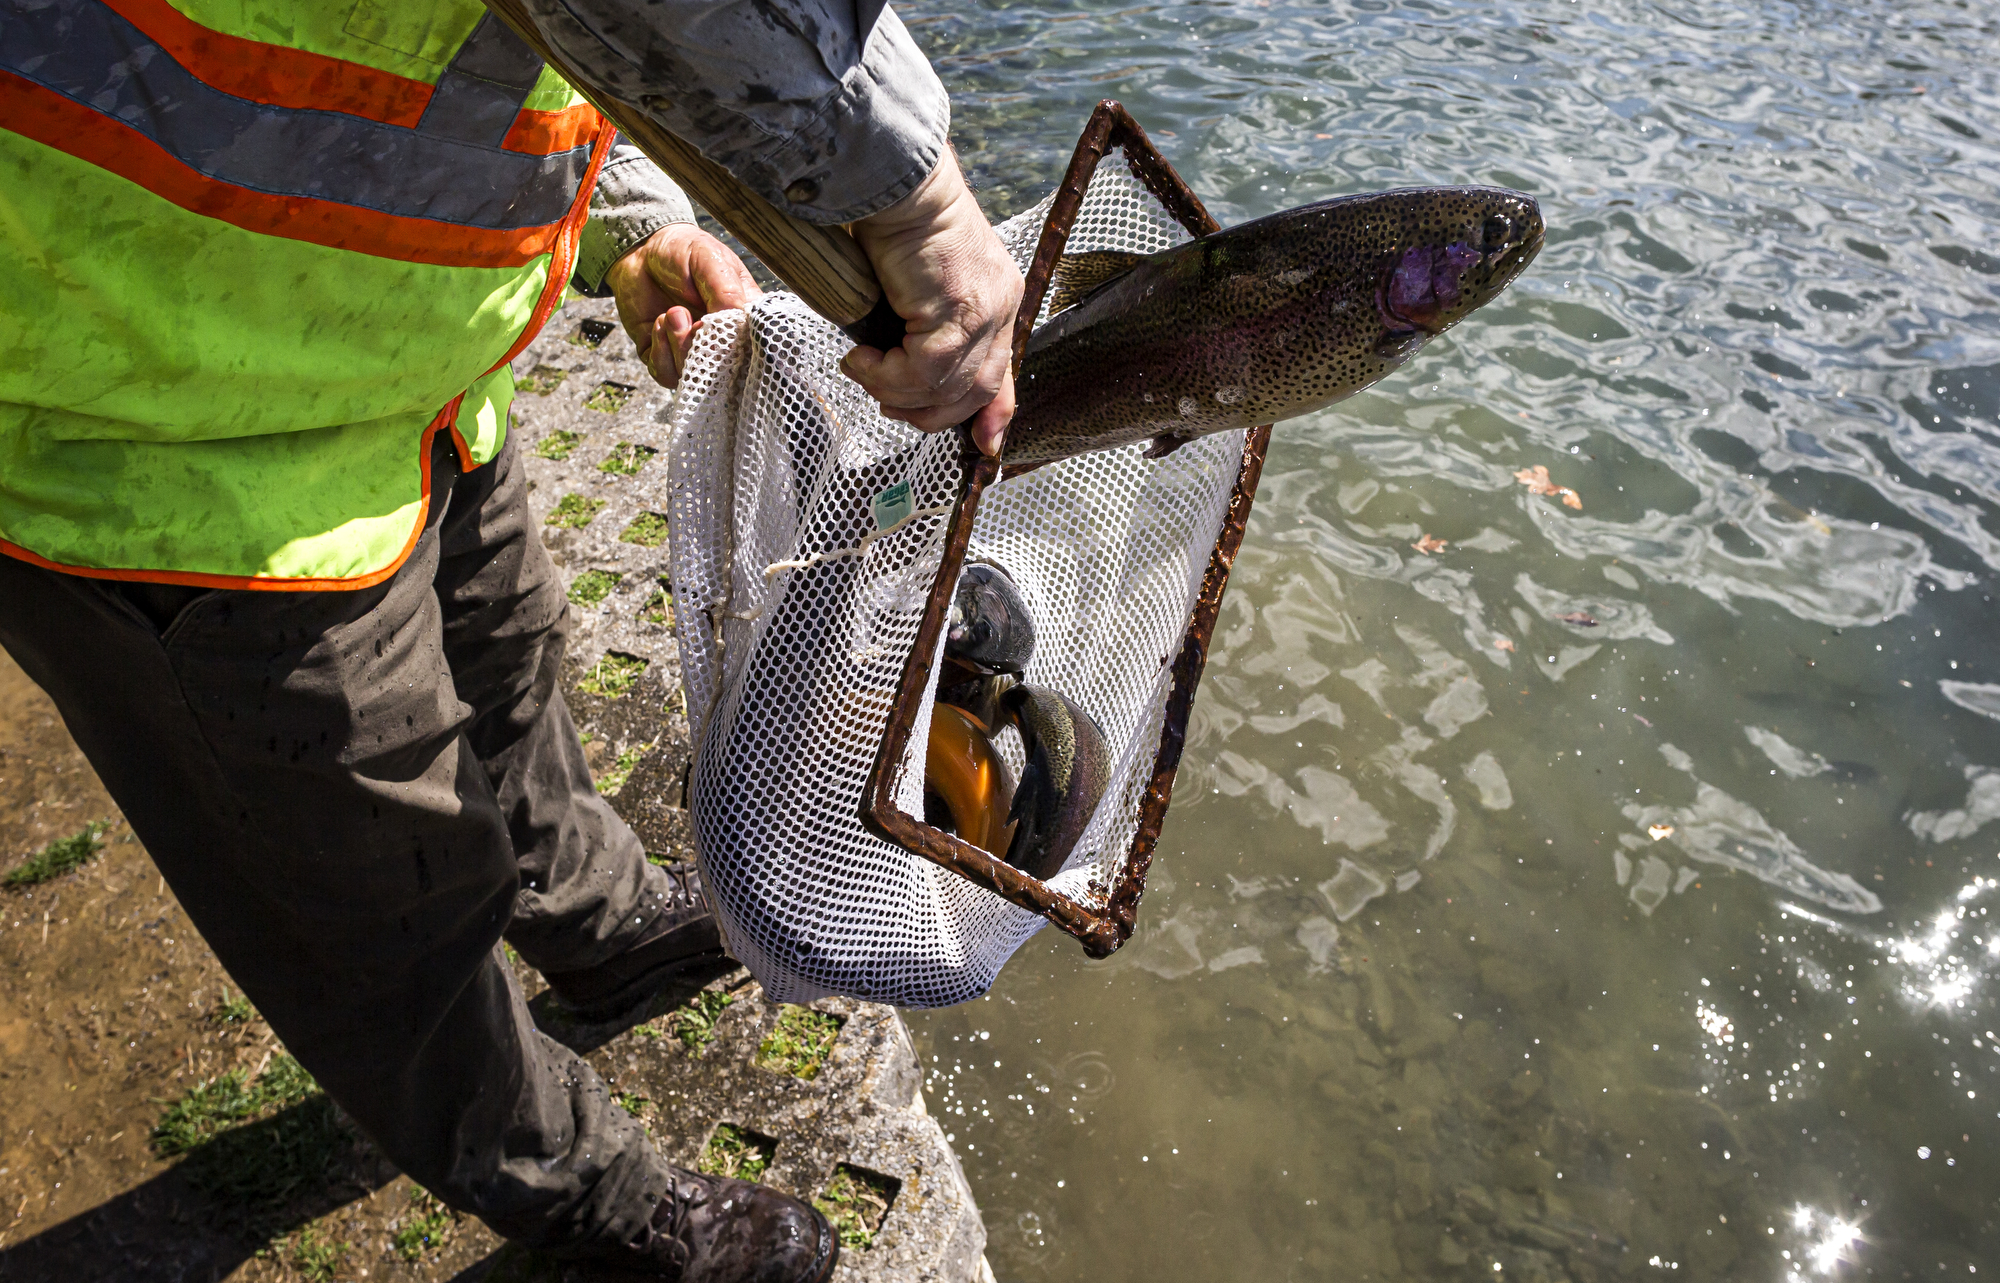 Some of Pa's 3.2 million trout stocked at Boiling Springs